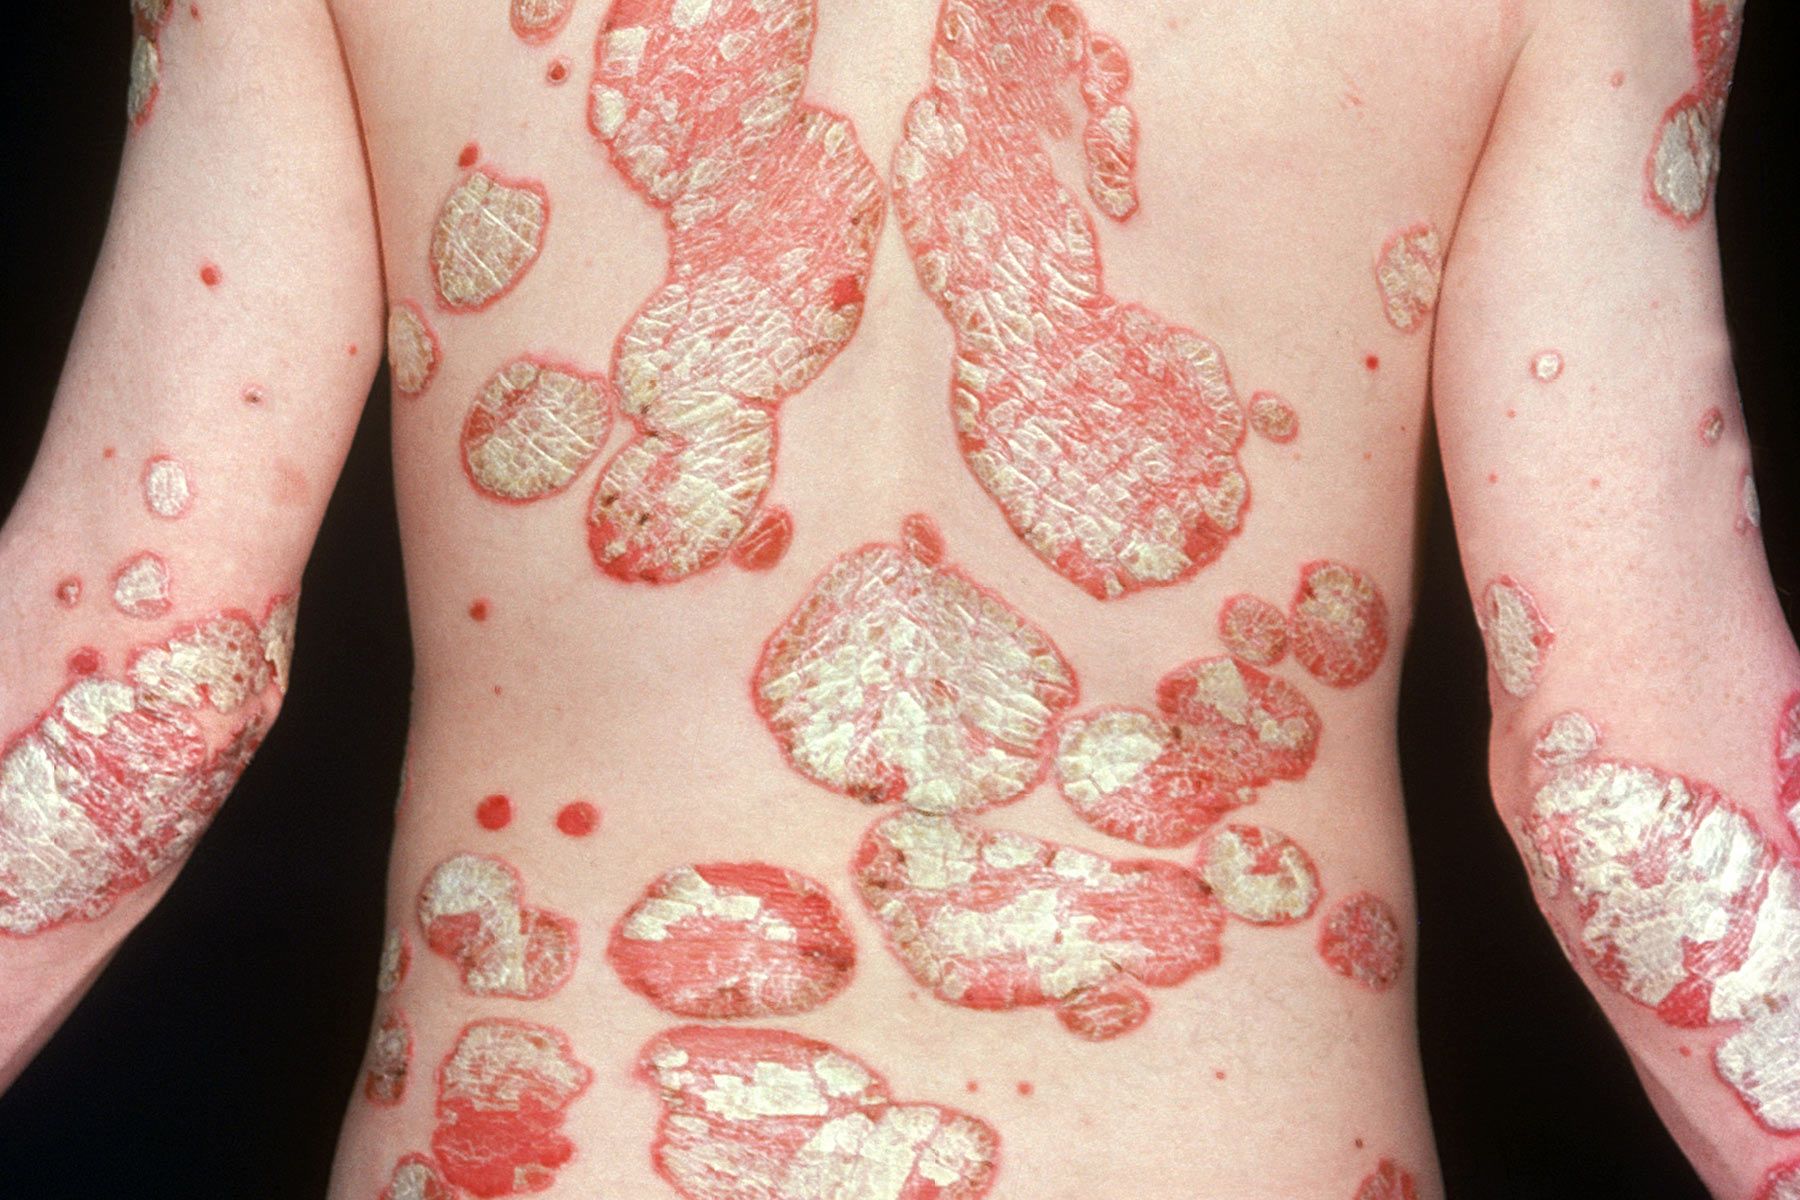 Slideshow: How Severe Is Your Psoriasis?